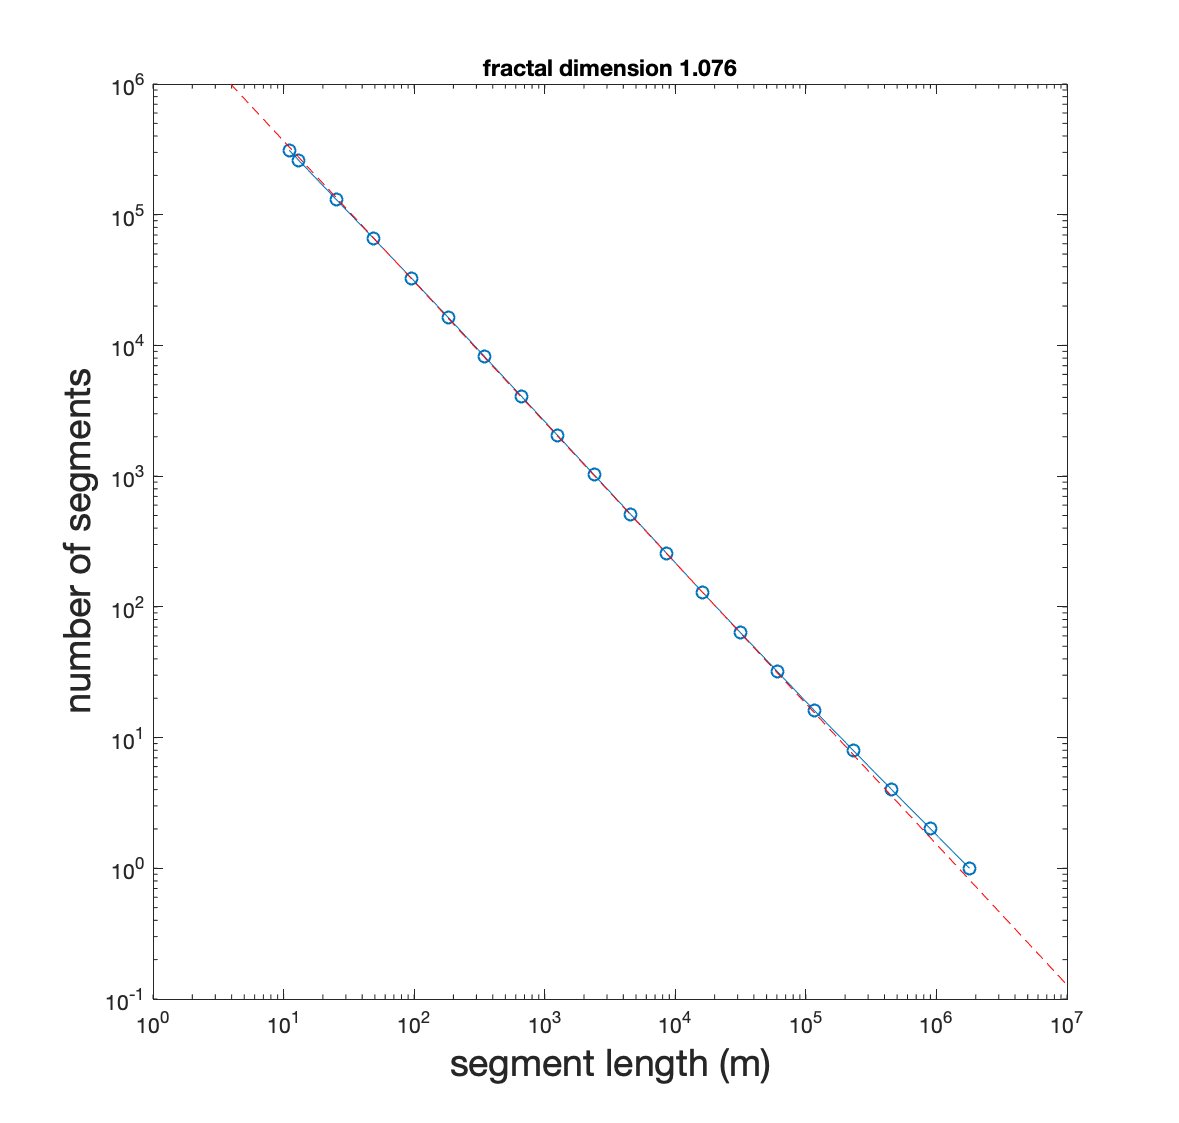 6/ Here's how you figure out the fractal dimension: plot the number of segments, N, in the trail as a function of the segment length L.A well-behaved curve would have N proportional to L.But a fractal has a funny power N ~ L^x.The AT has x ~ 1.08.